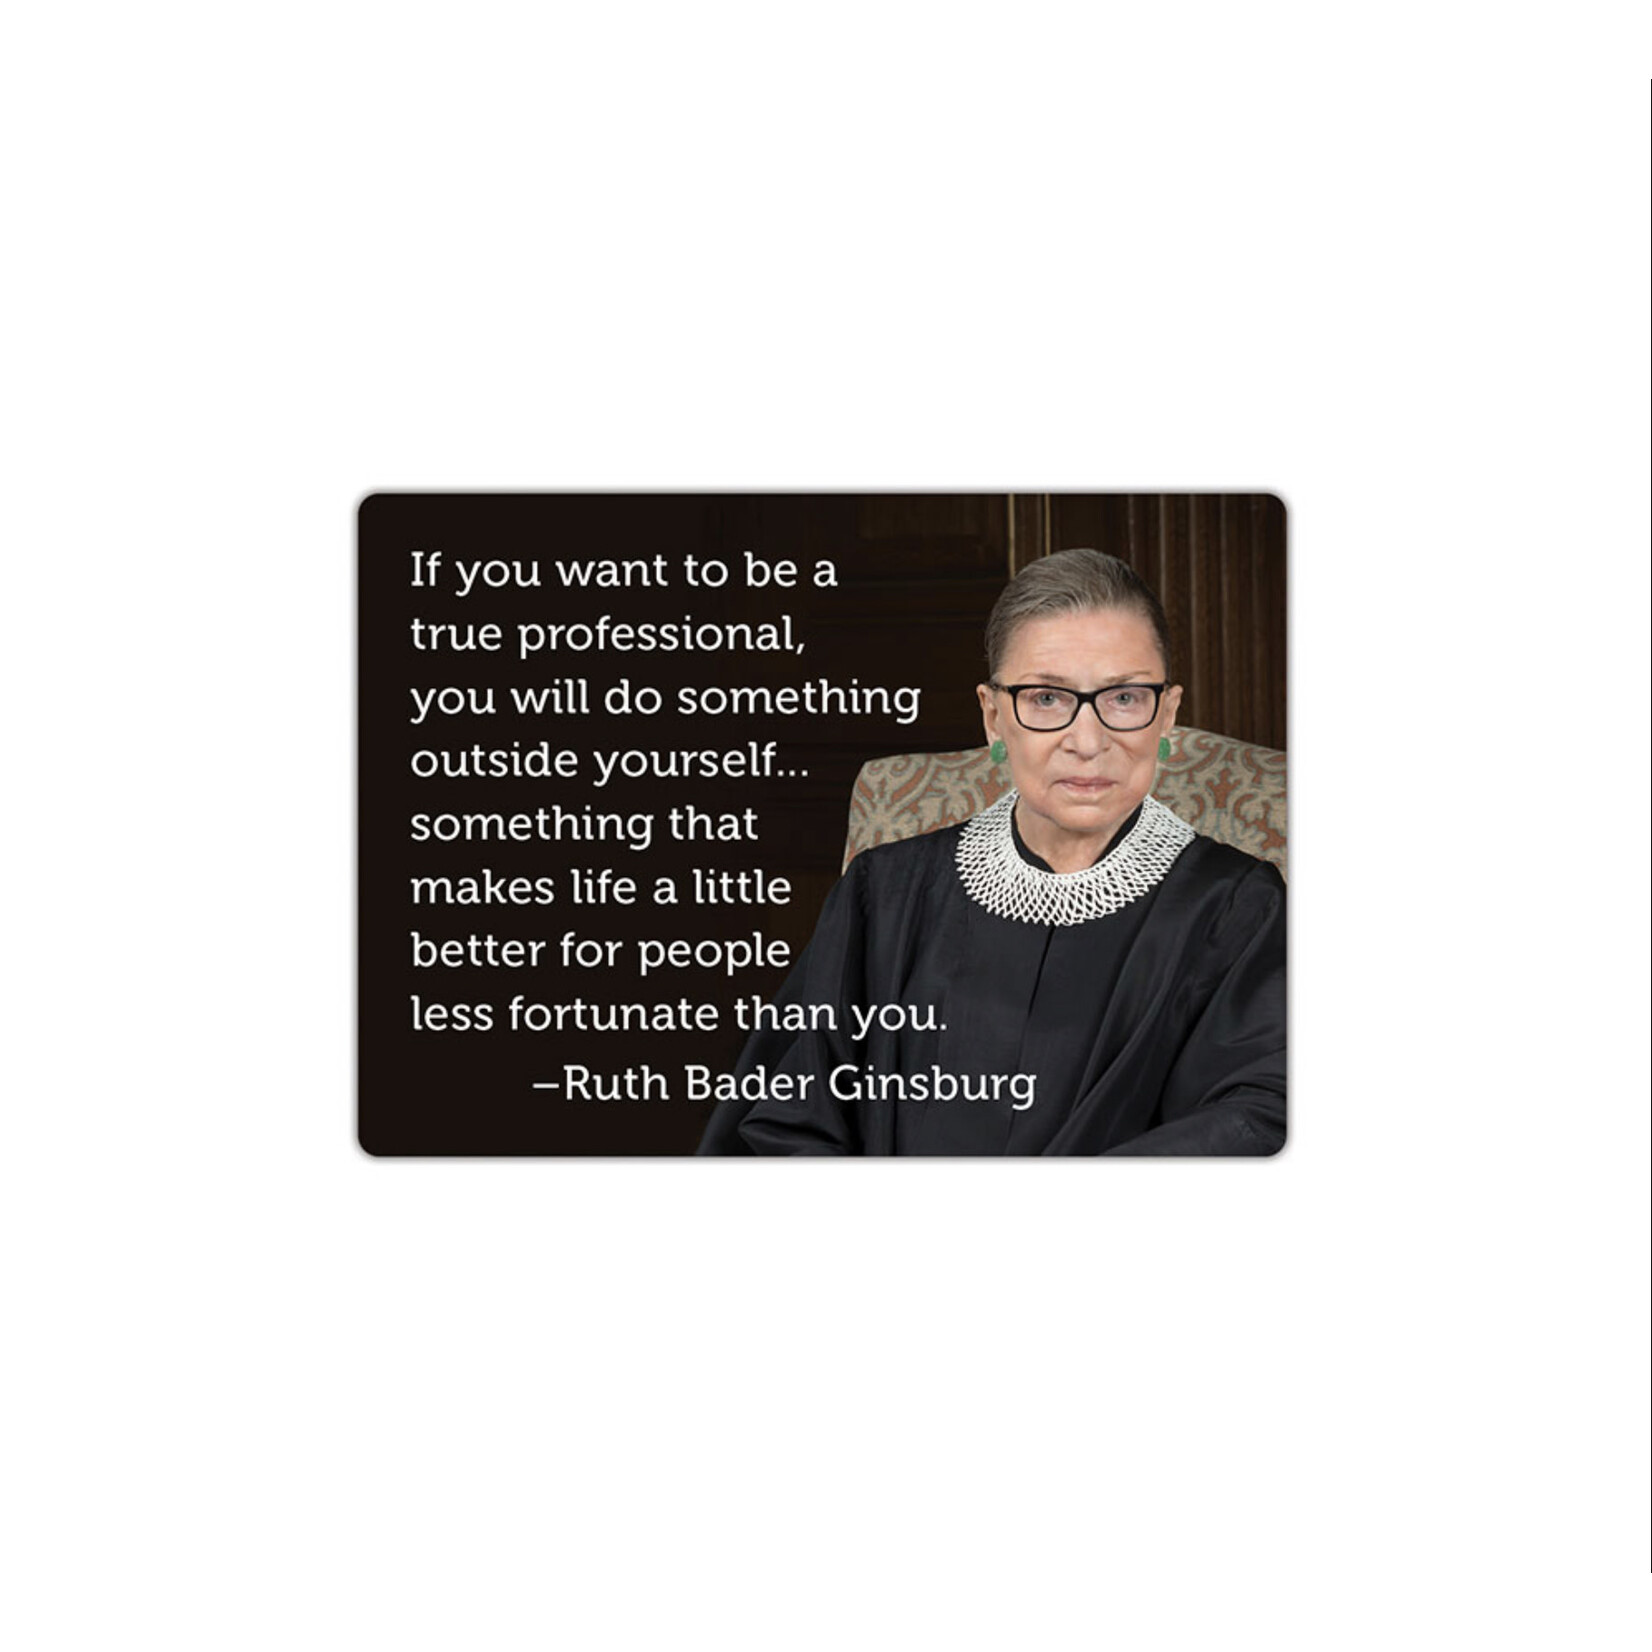 Magnet In The Mail - Ruth Bader Ginsberg (RBG)